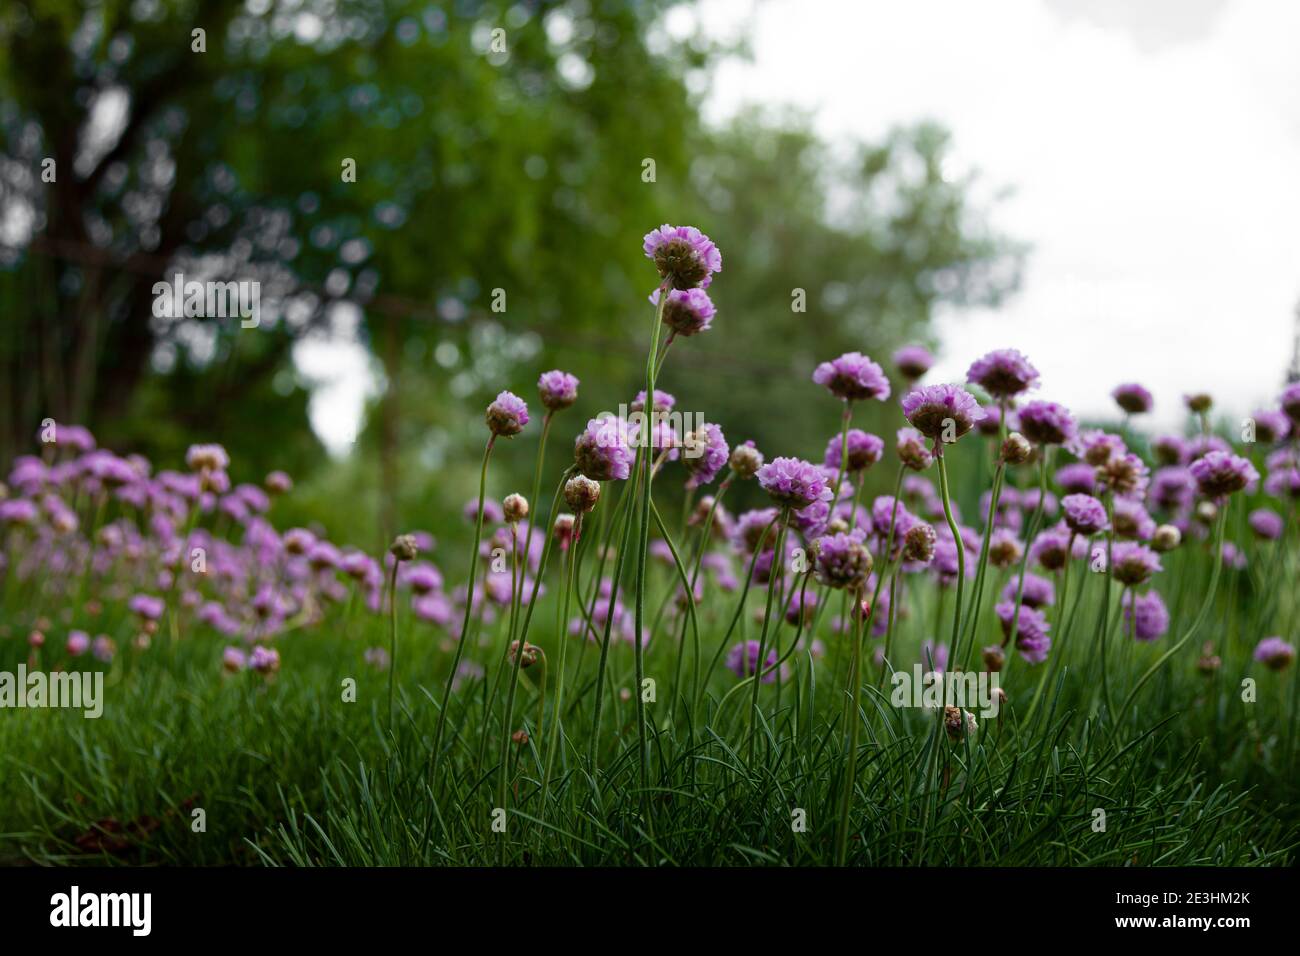 Purple flowers in the garden. Onion, or chives, is a perennial herbaceous plant Latin name: Allium schoenoprasum. Stock Photo